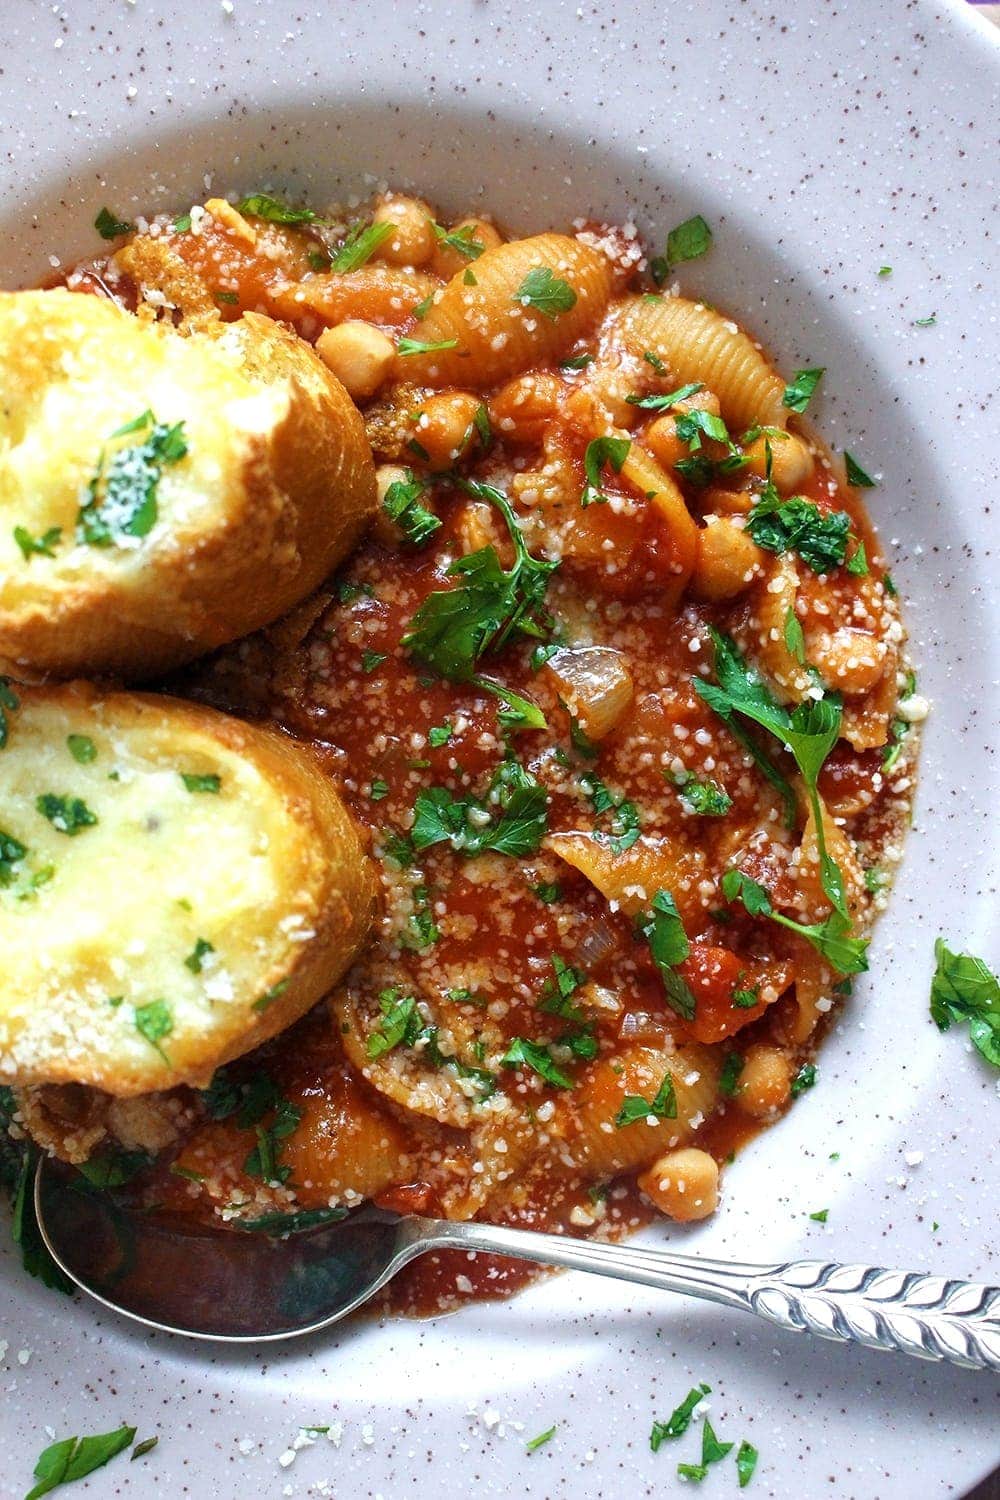 This pasta & chickpea soup is a filling dinner especially topped with these incredible cheesy toasts. Add a sprinkling of parmesan for a burst of flavour!